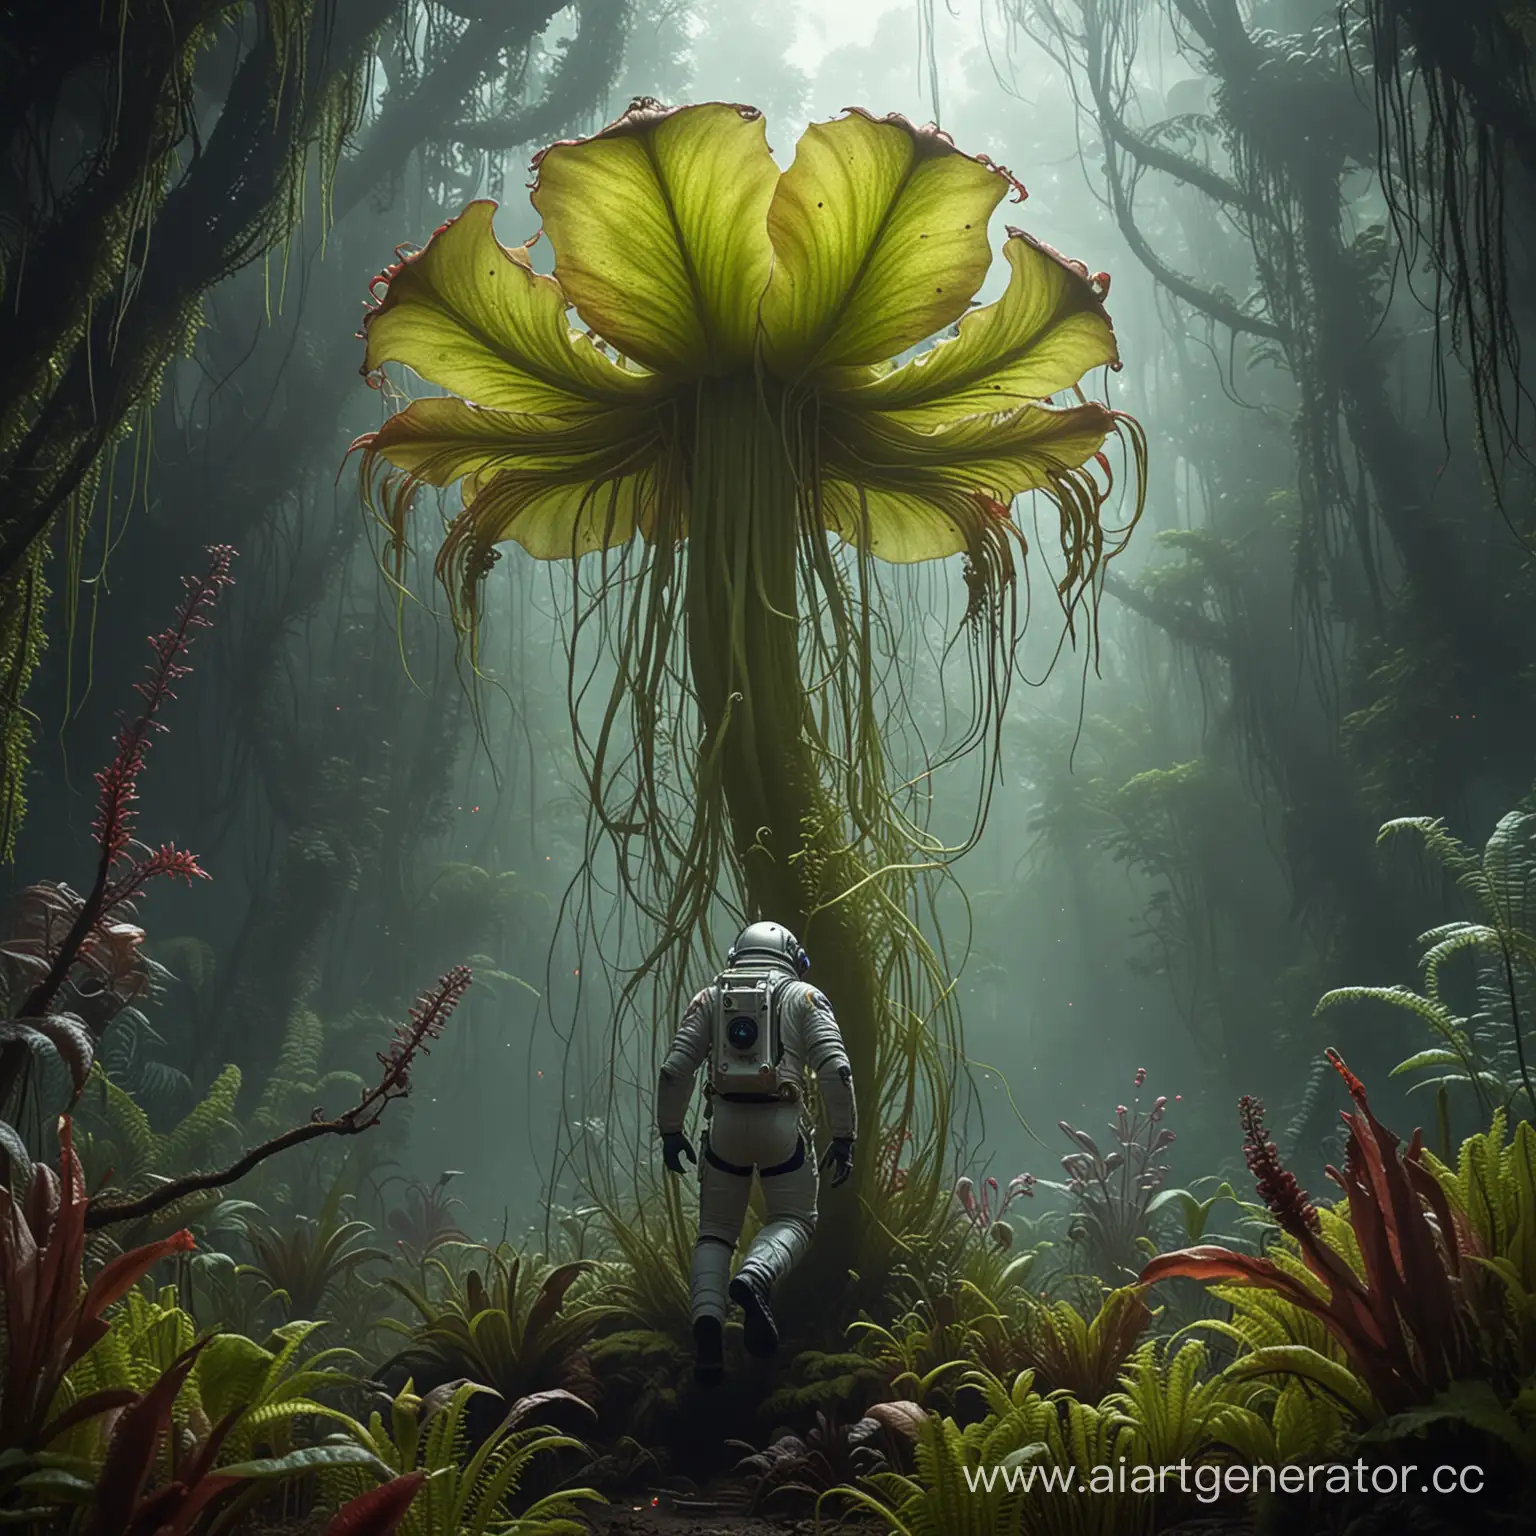 A giant alien carnivorous plant attacks astronauts on an unknown world.